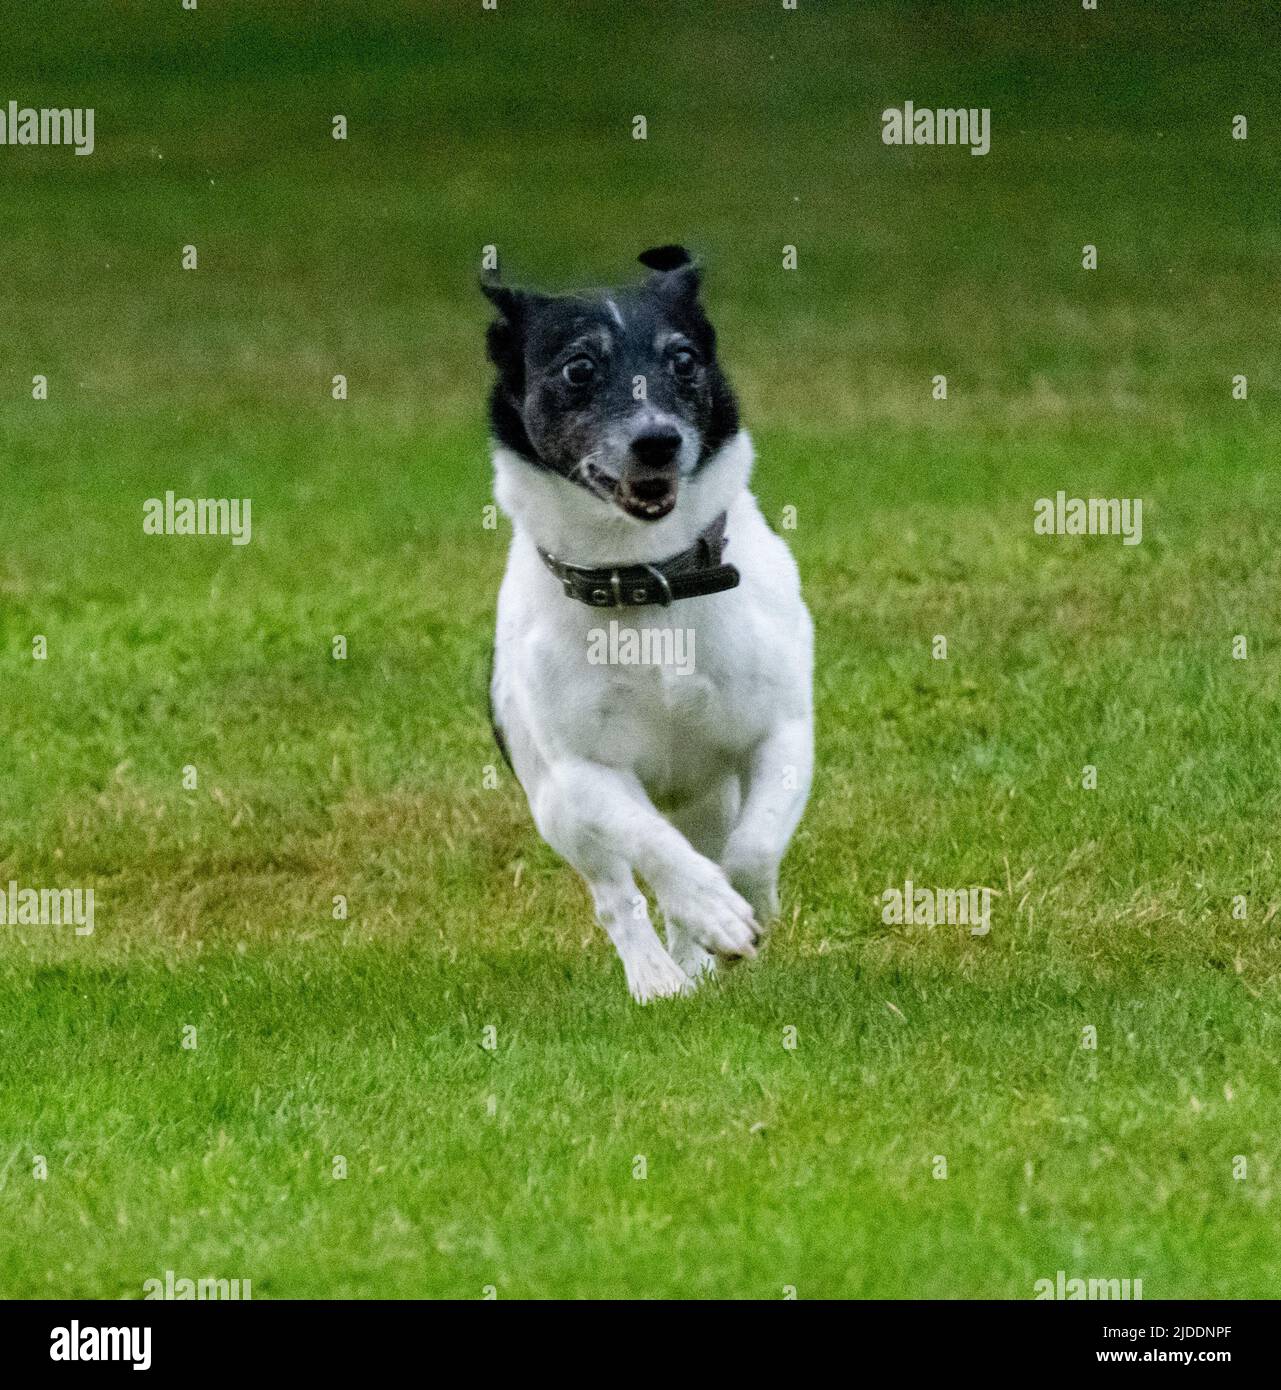 A white smooth coated Jack Russell with a black head and aging grey running through its black head running towards the camera Stock Photo